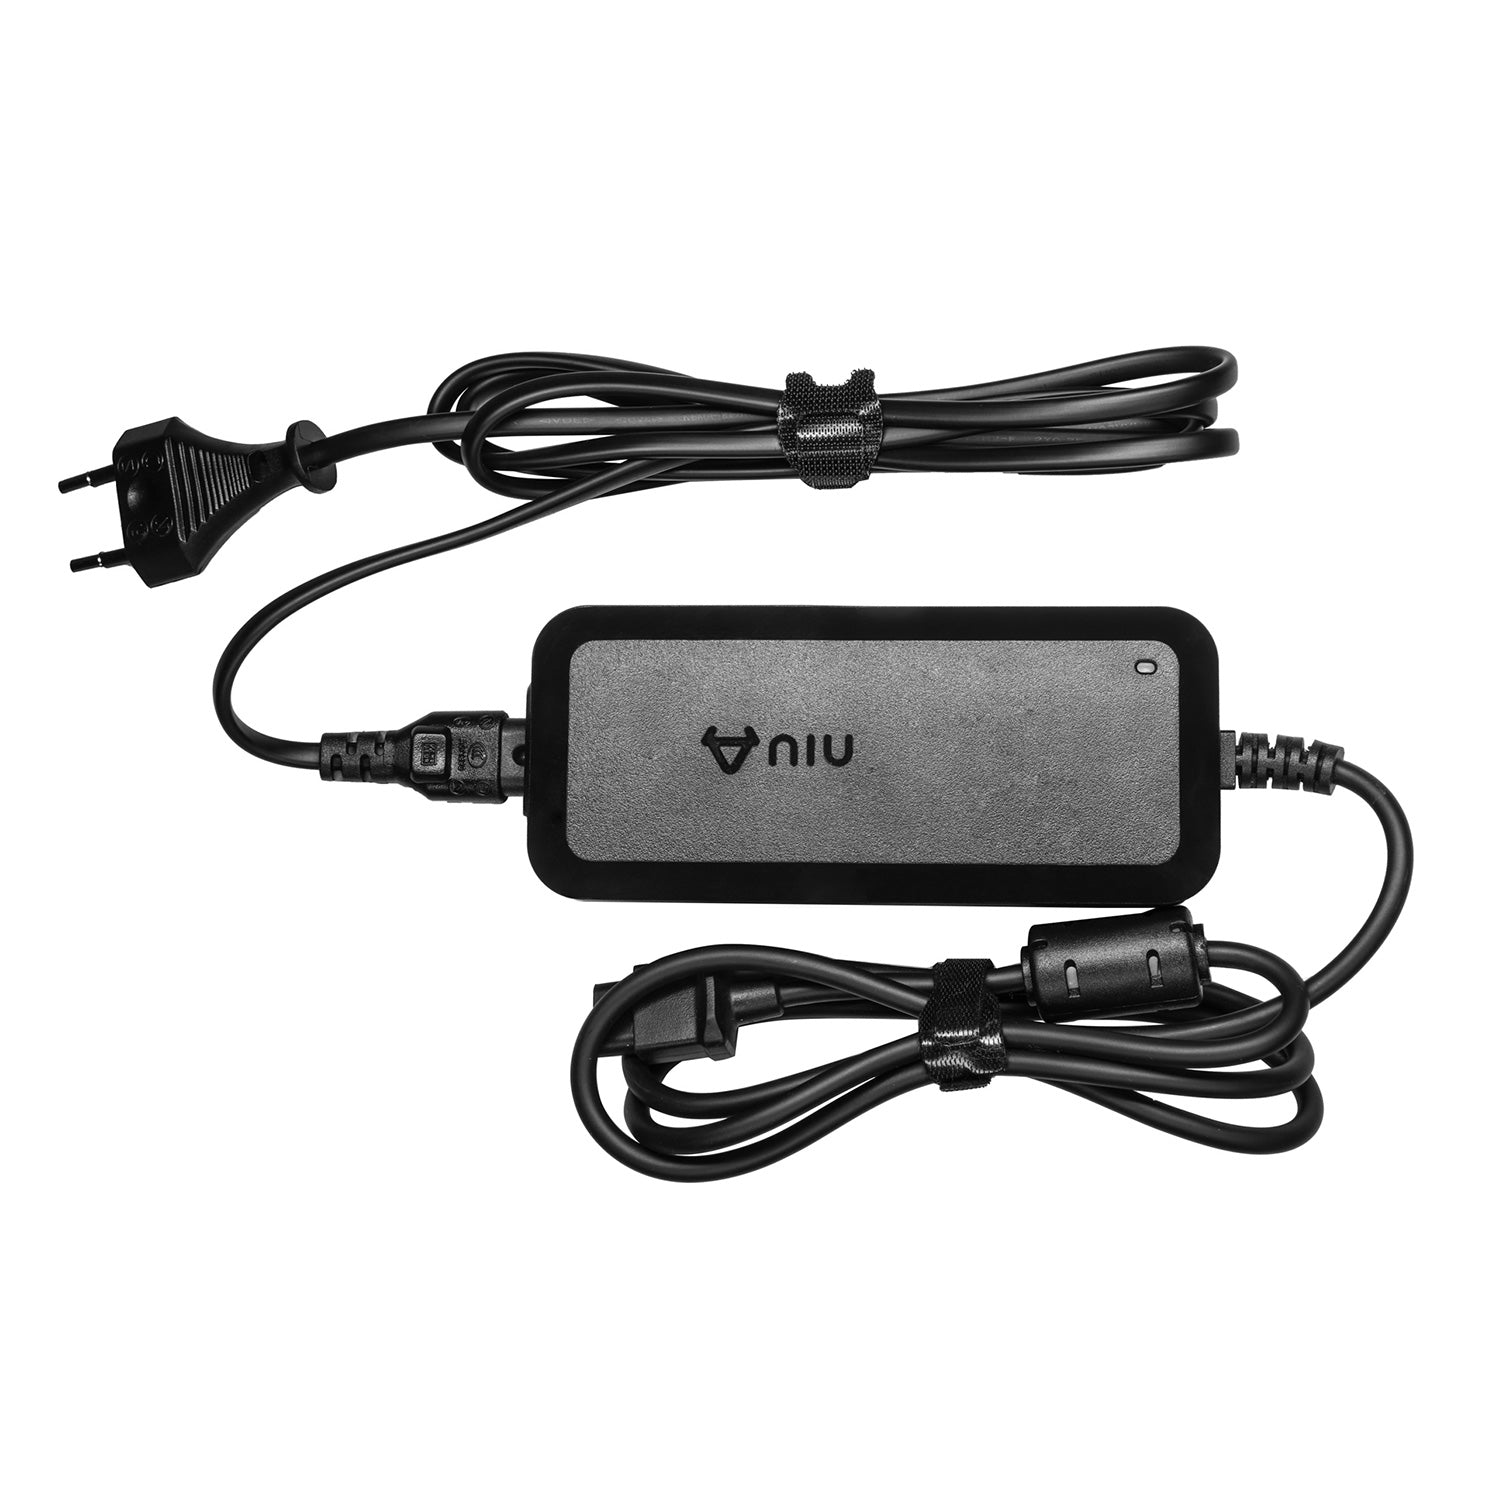 KQi2 Pro Charger